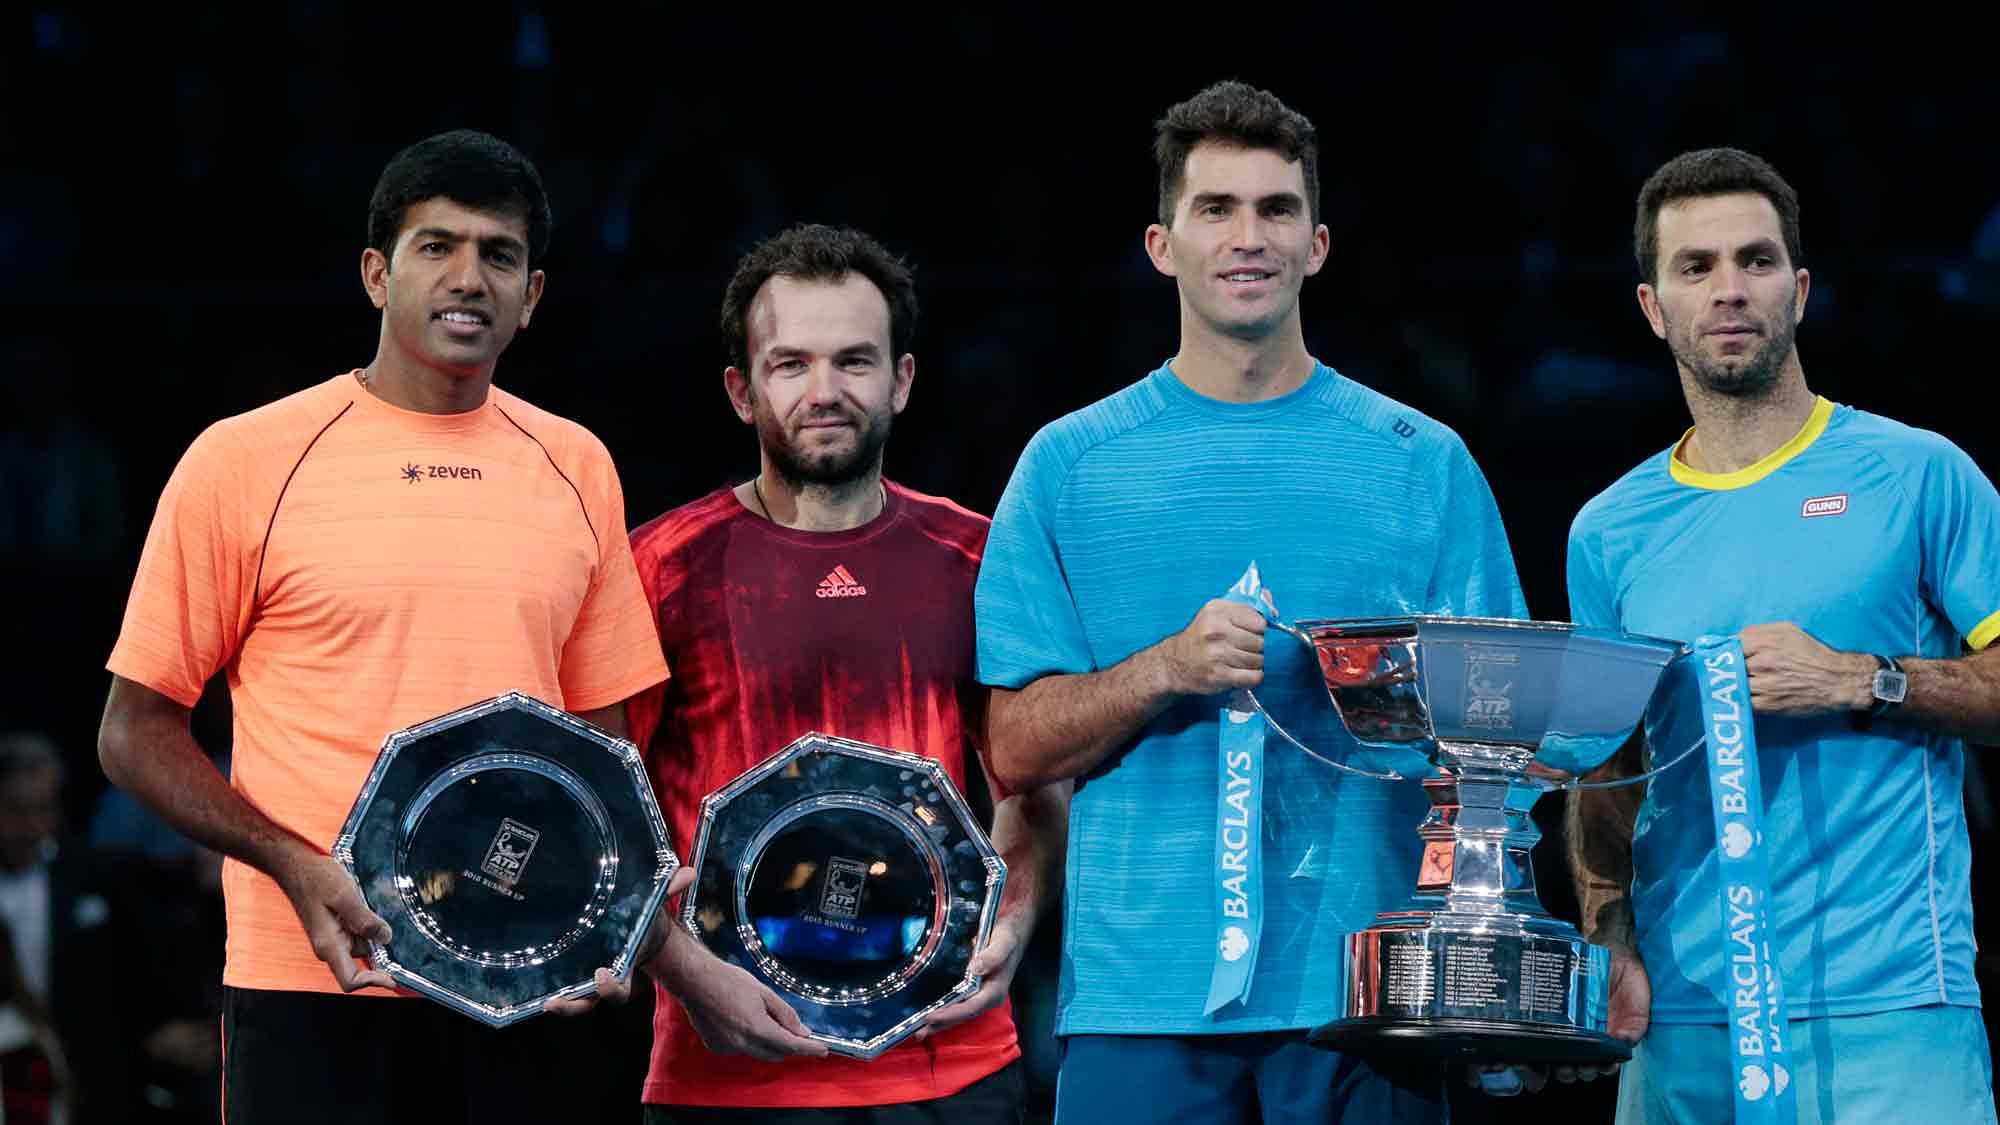 Netherlands’ Jean Julien Rojer and Romania’s Horia Tecau (both in blue) celebrate with runners up  Rohan Bopanna of India  and  Florin Mergea of Romania after winning the final. (Photo: Reuters)